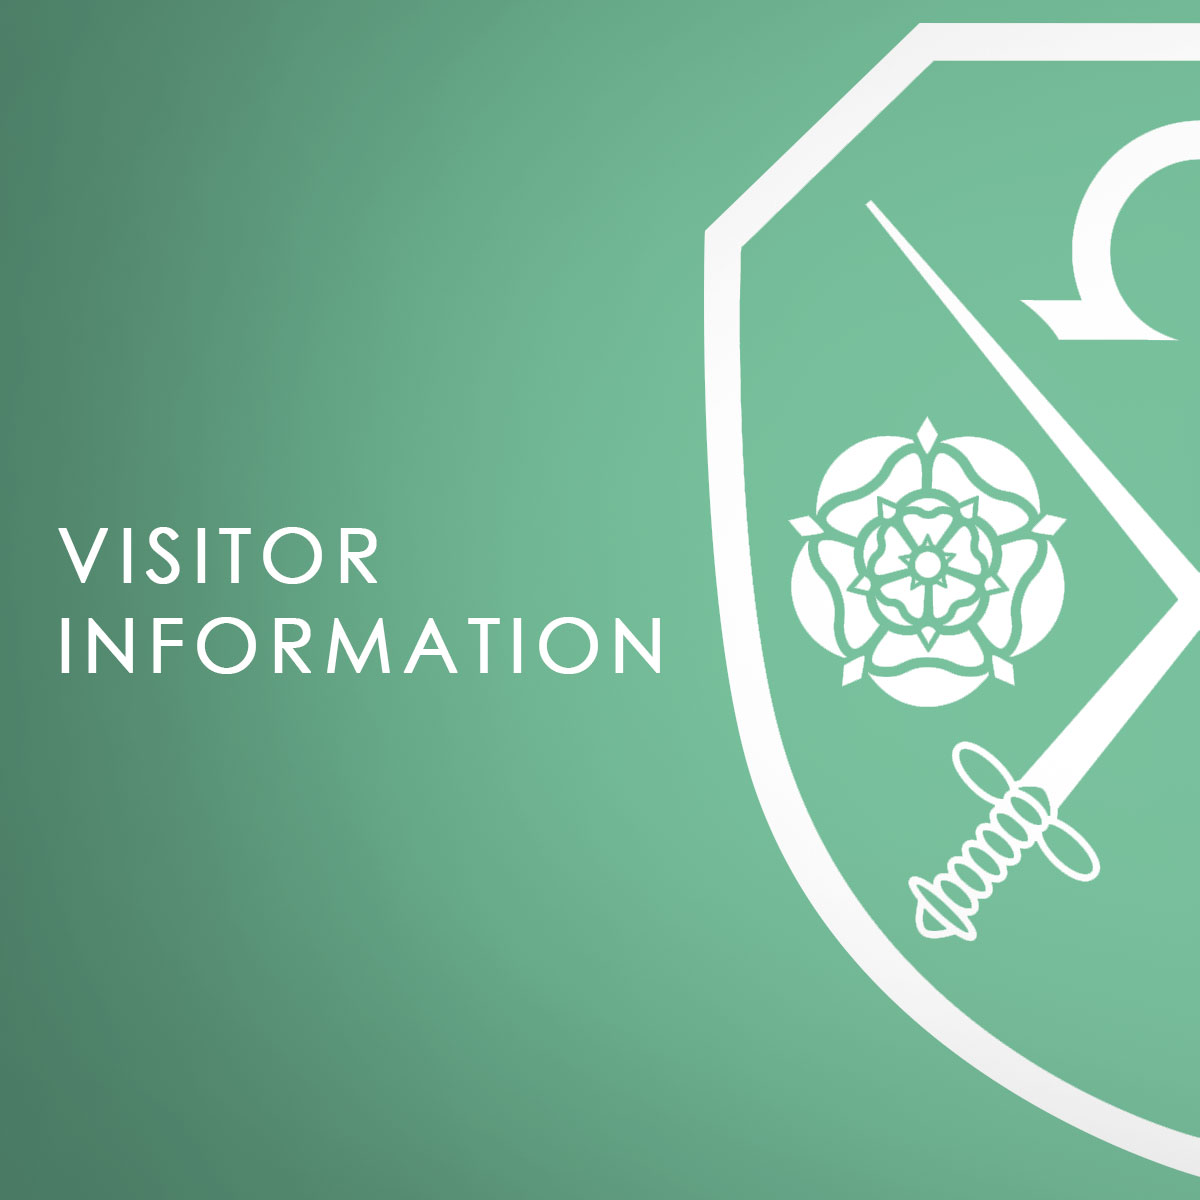 A green background with the East Barnet School logo which says Visitor Information